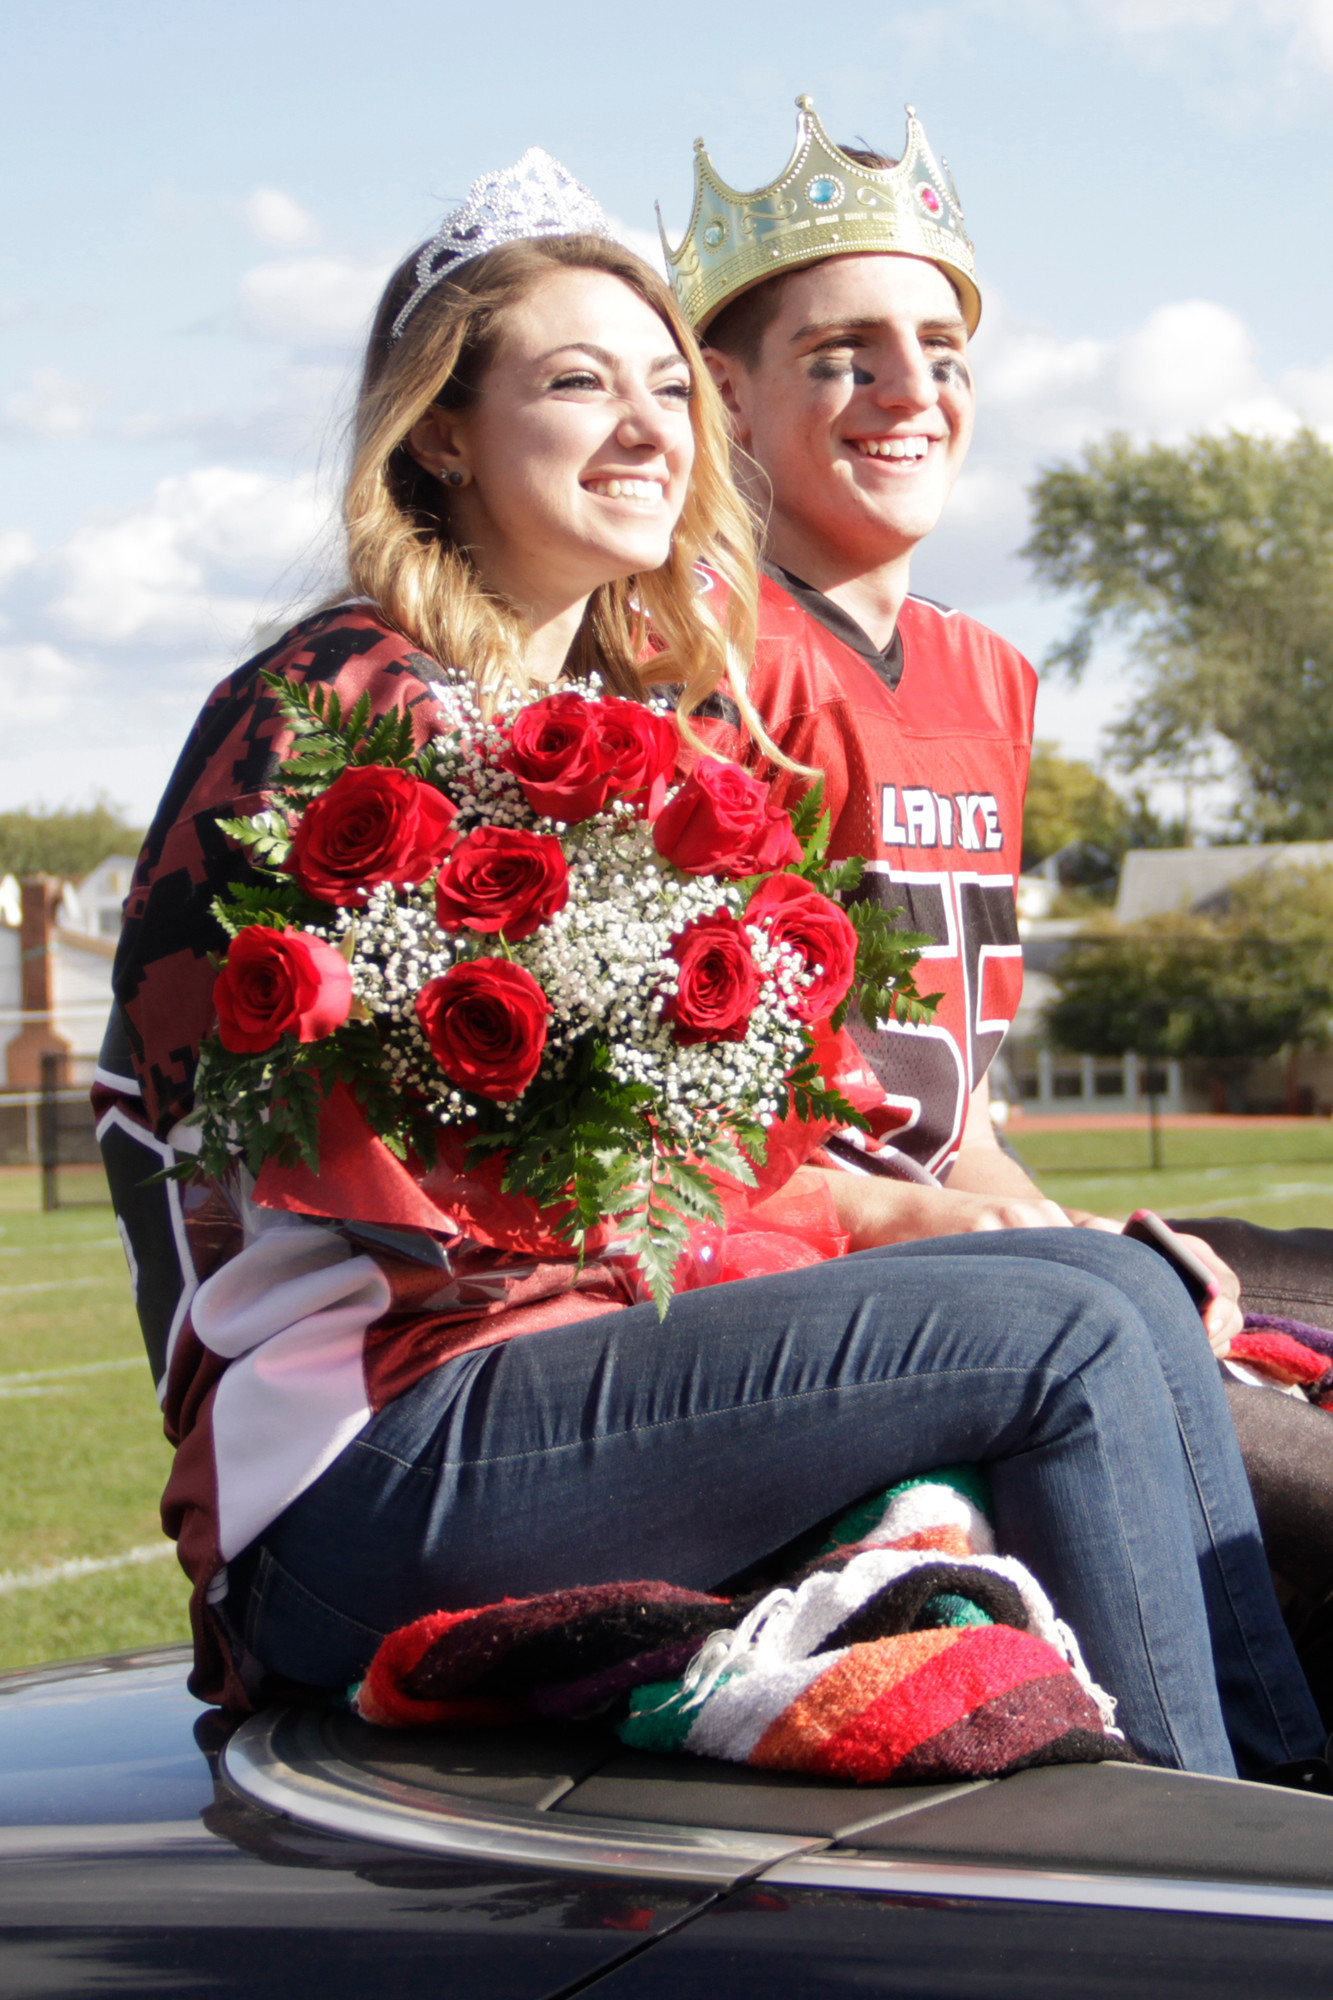 Homecoming Queen and King, Holly Romeo and Nick Normile, were all smiles atop their mobile throne.